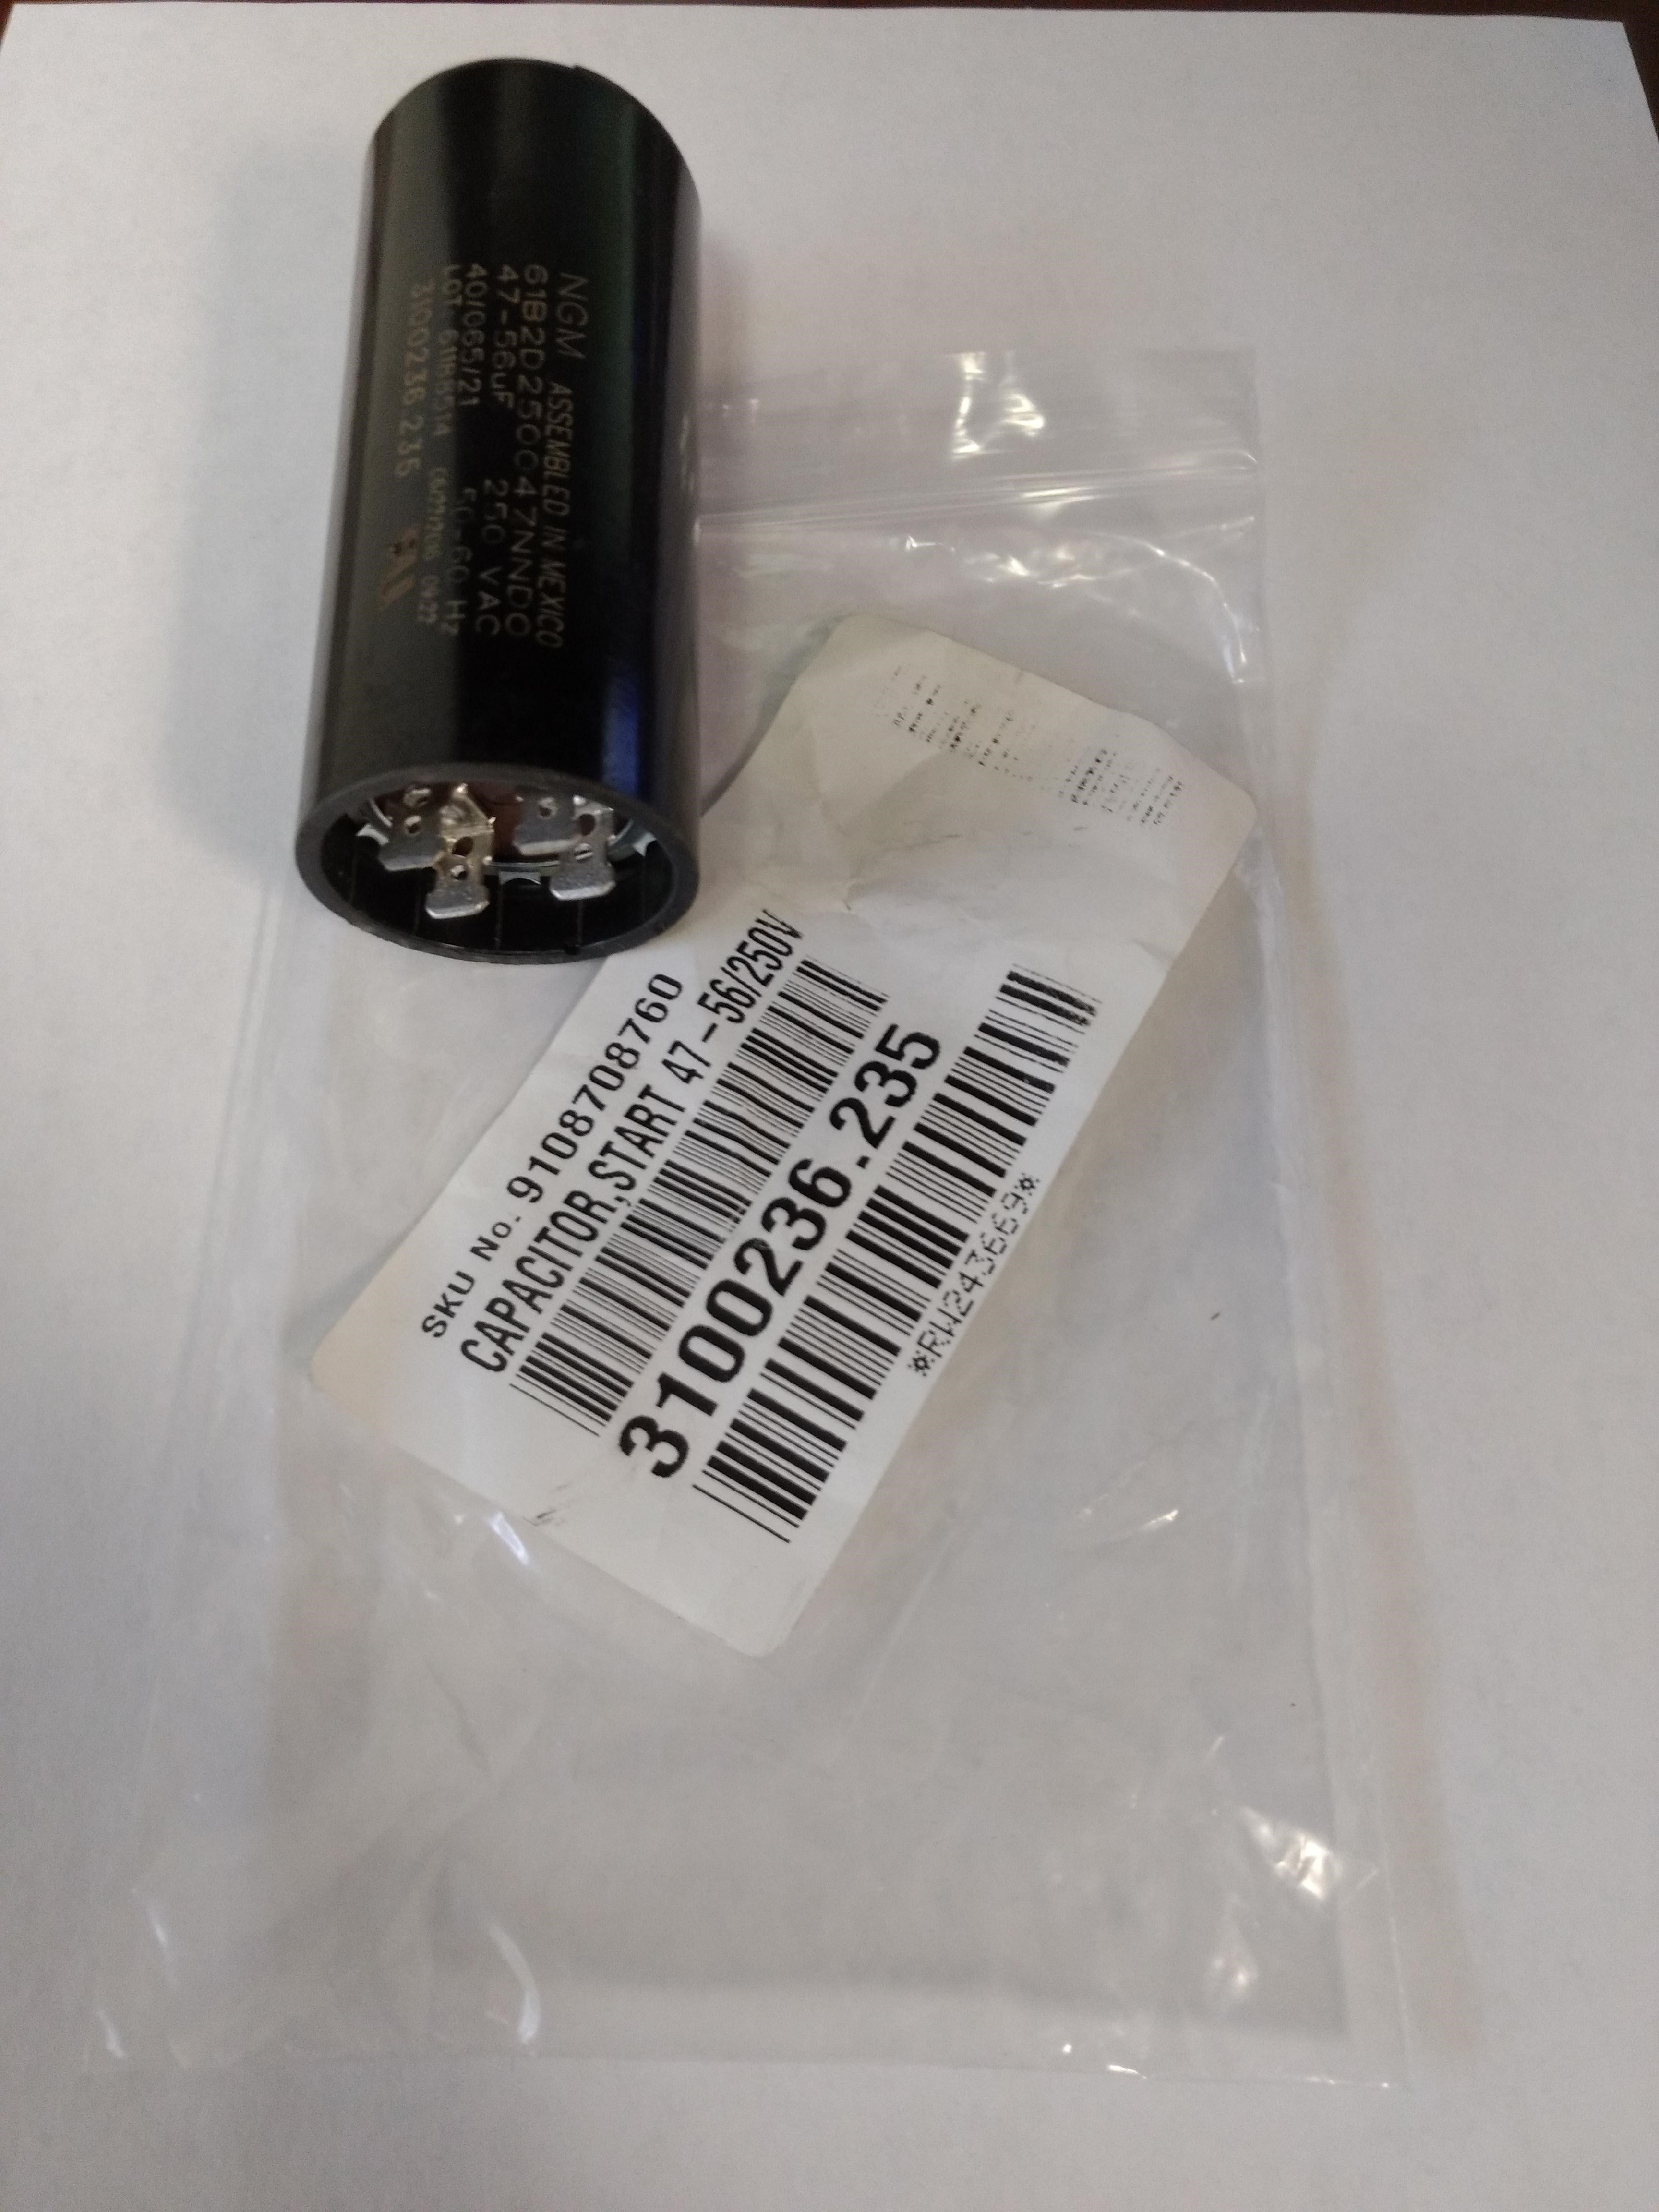 Dometic 3100236.235 Air Conditioner Hard Start Capacitor - Need Pic